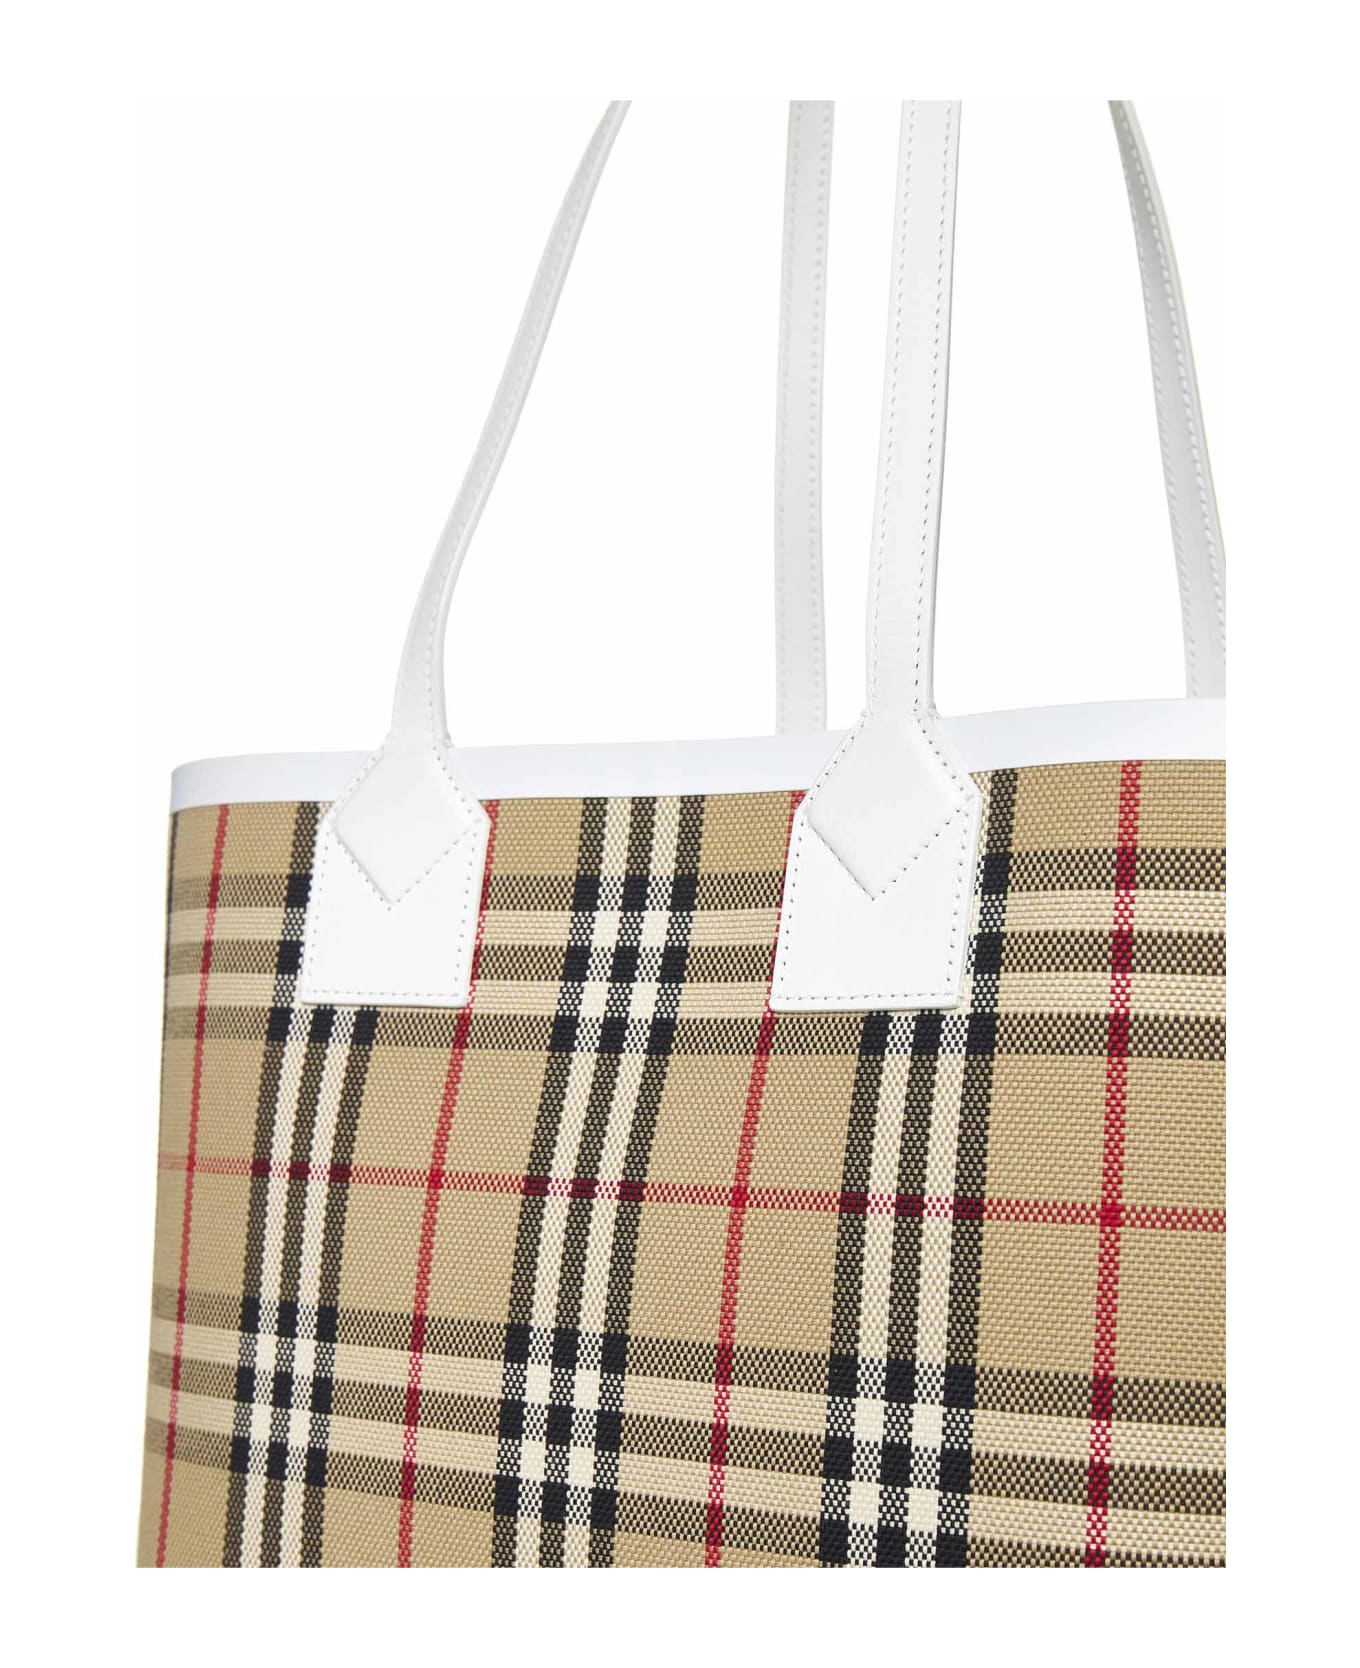 Burberry Small London Tote Bag - Vintage check/white トートバッグ